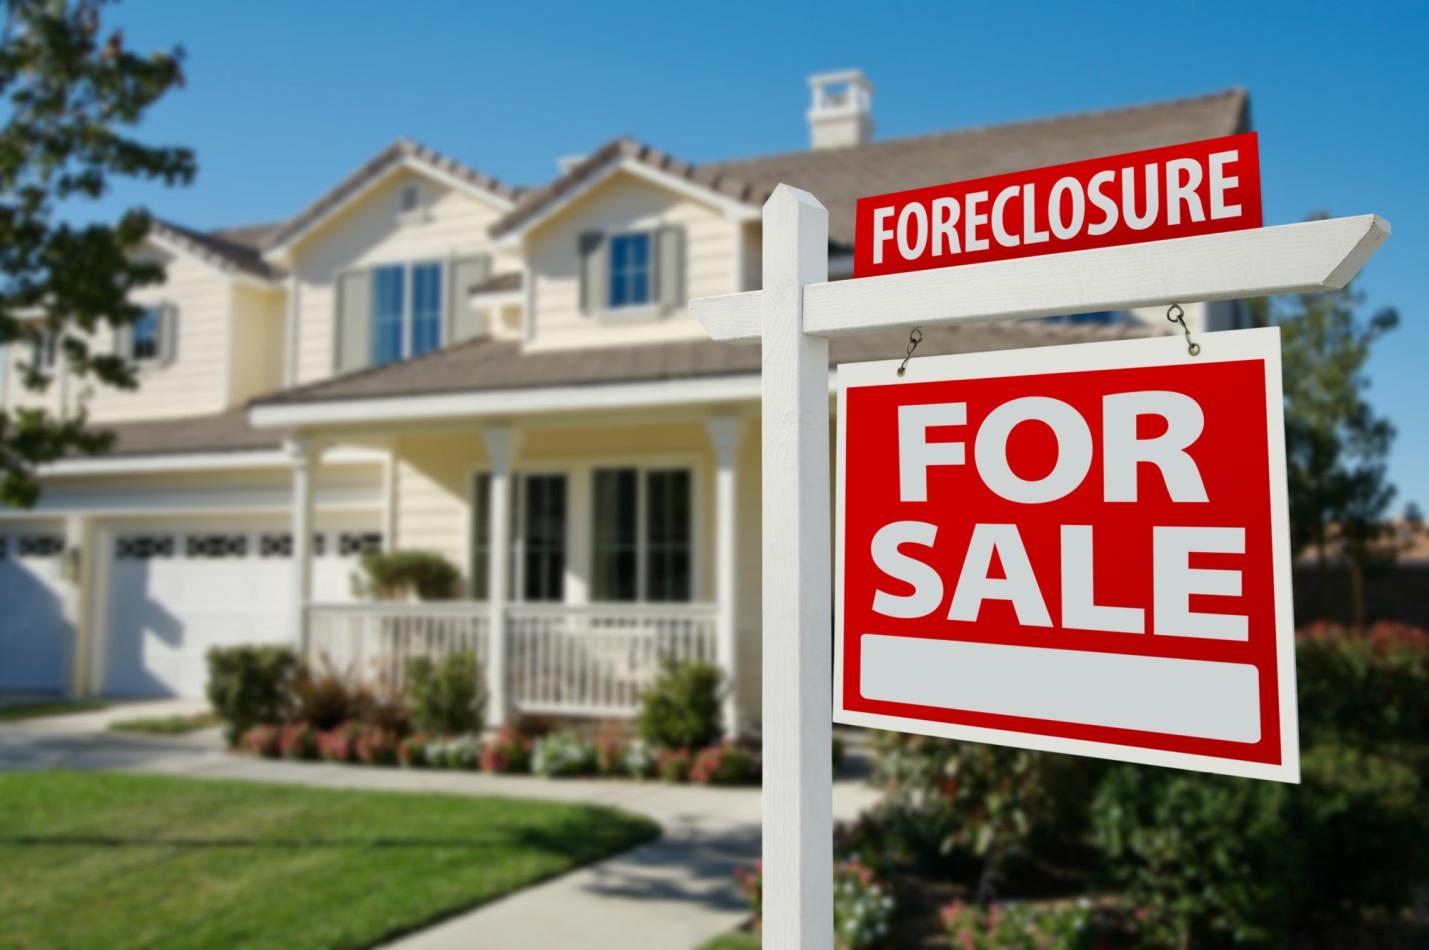 A "For Sale" sign in front of a house available for purchase.